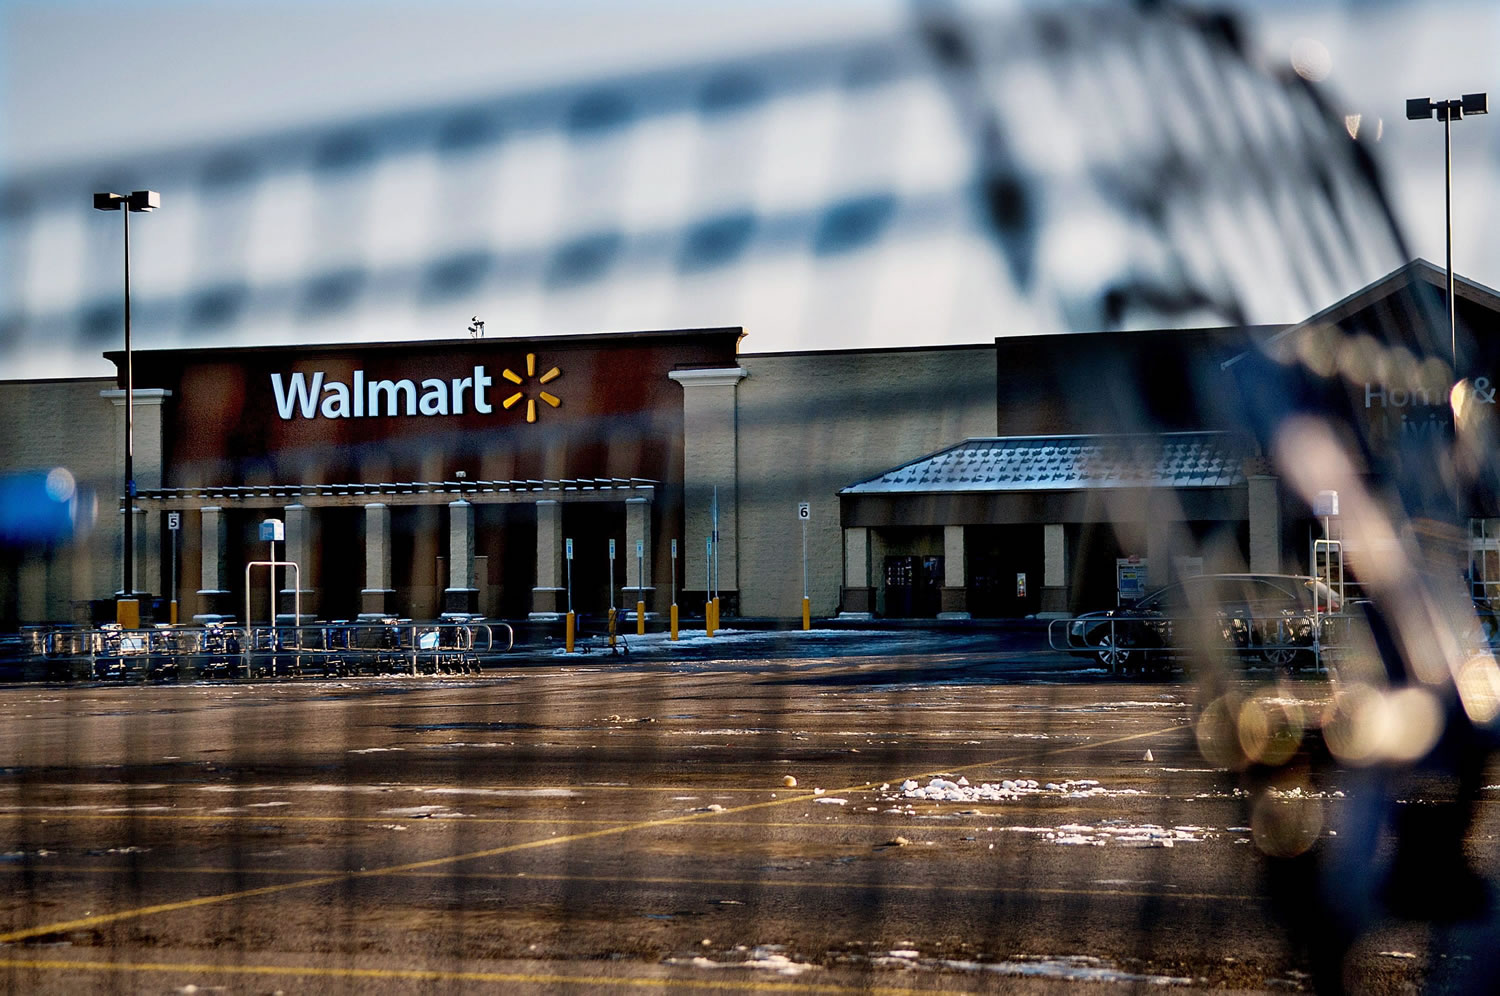 The Wal-Mart with a shopping cart in the foreground in Hayden, Idaho, on Tuesday.